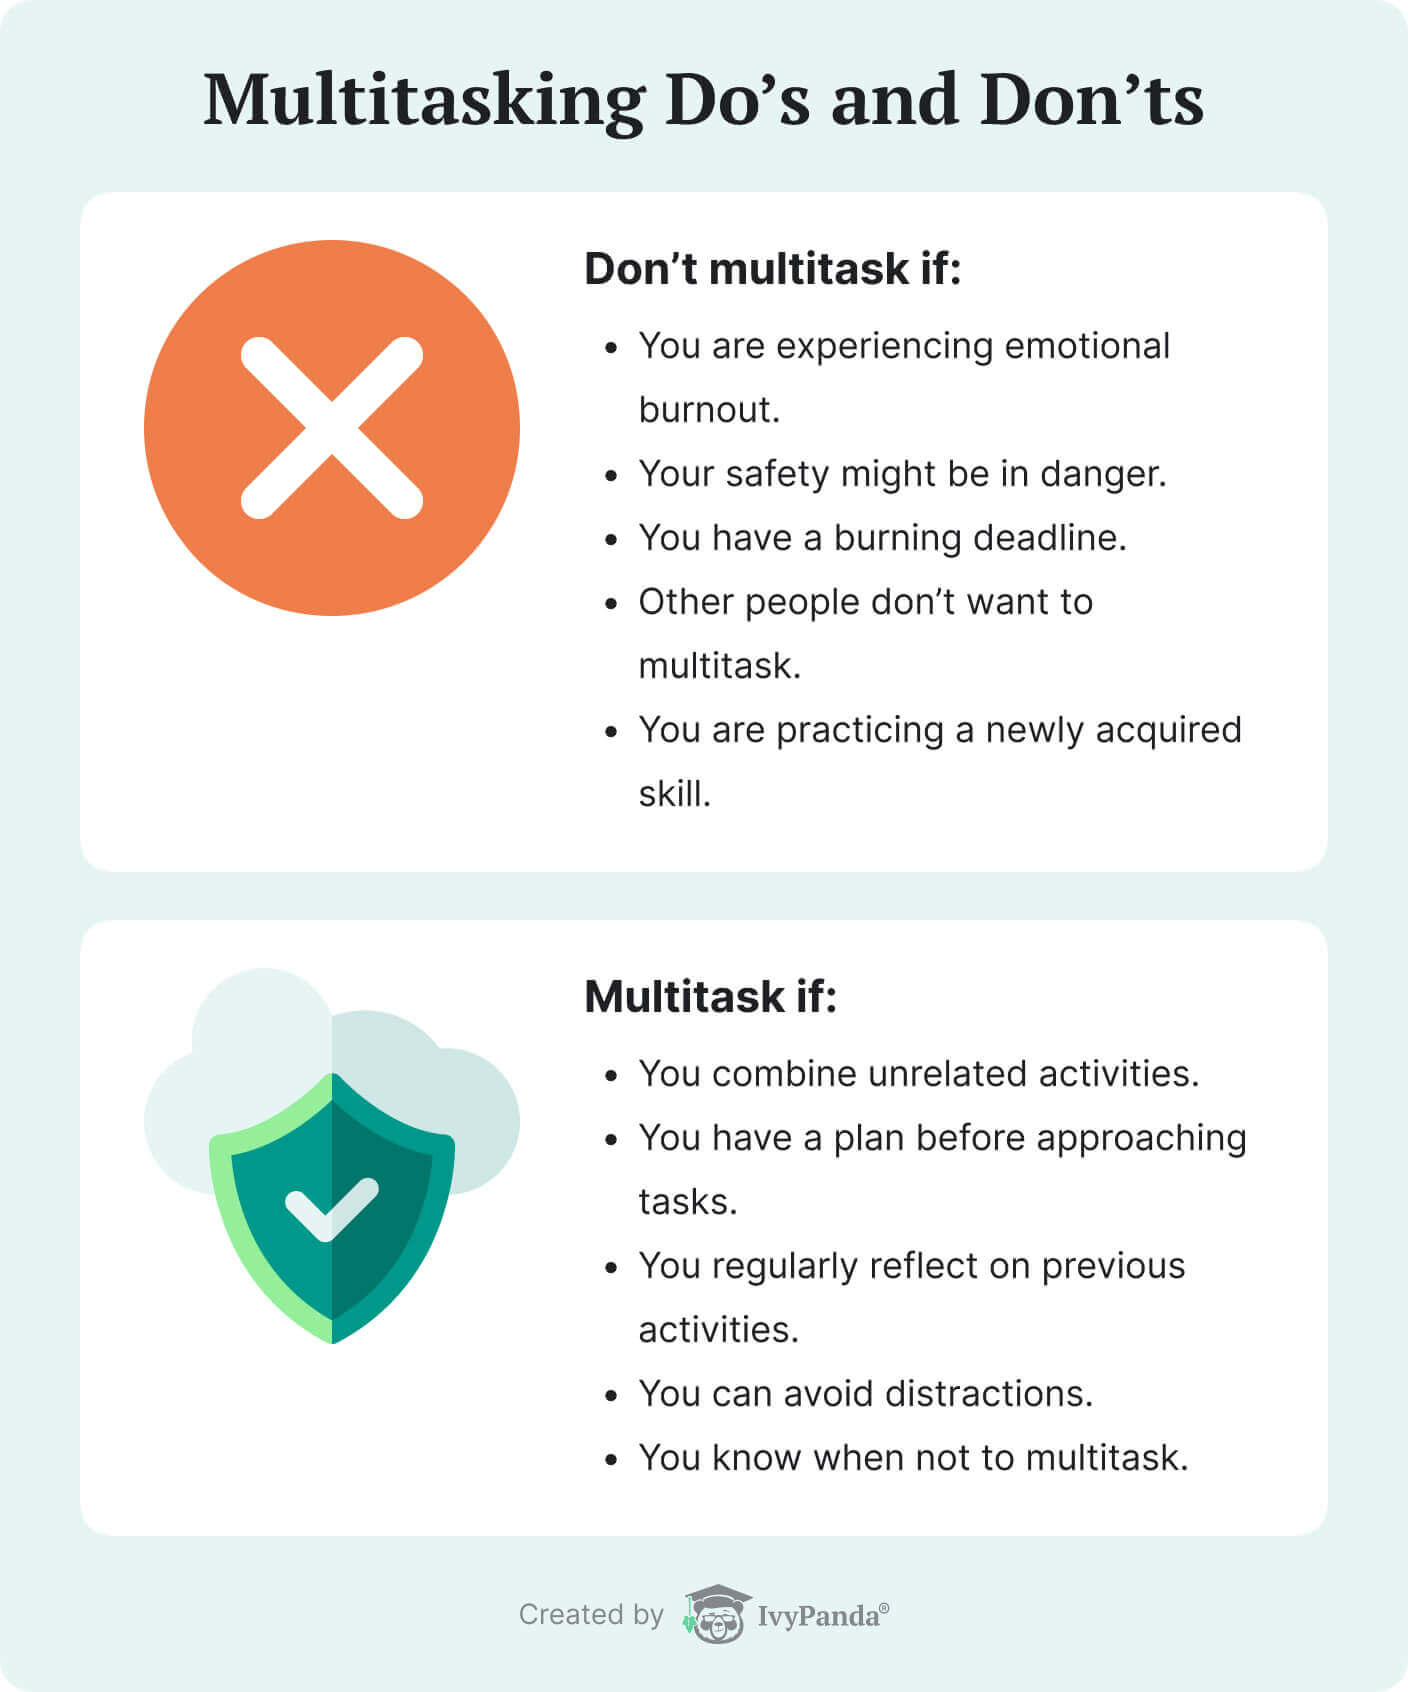 The picture shows do's and don'ts of multitasking.